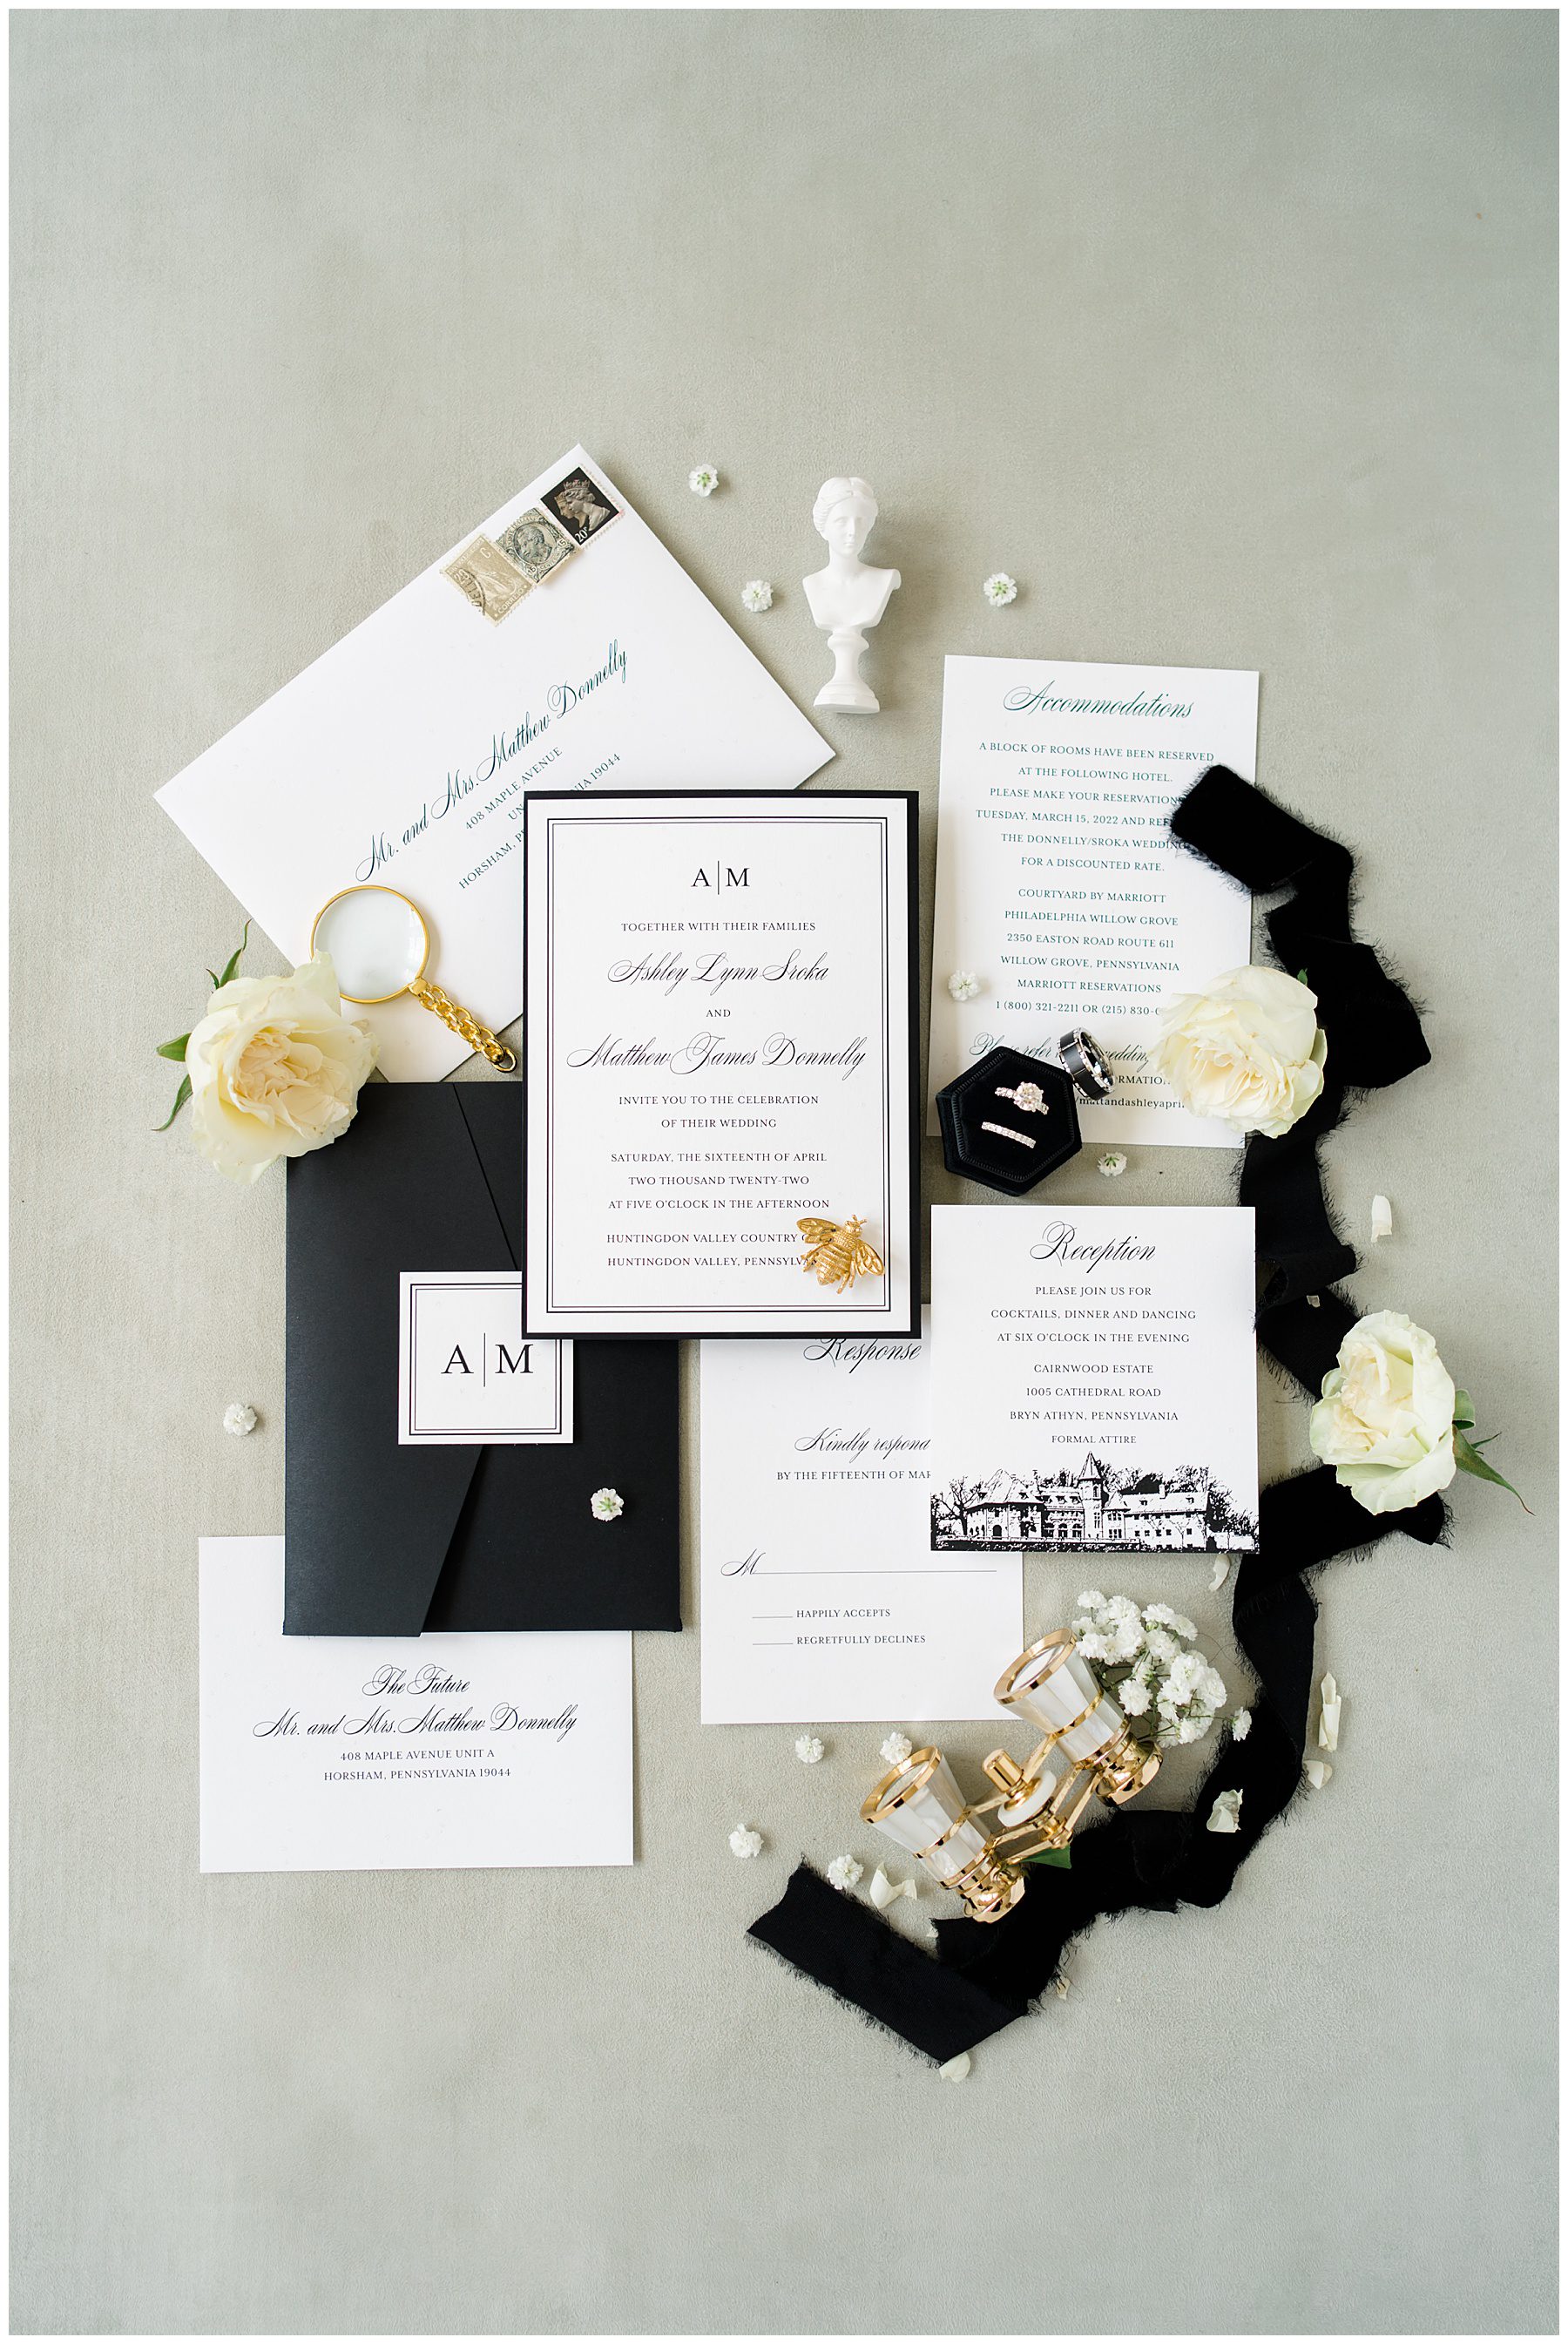 Classic black and white wedding invitation styled with white flowers and black ribbon